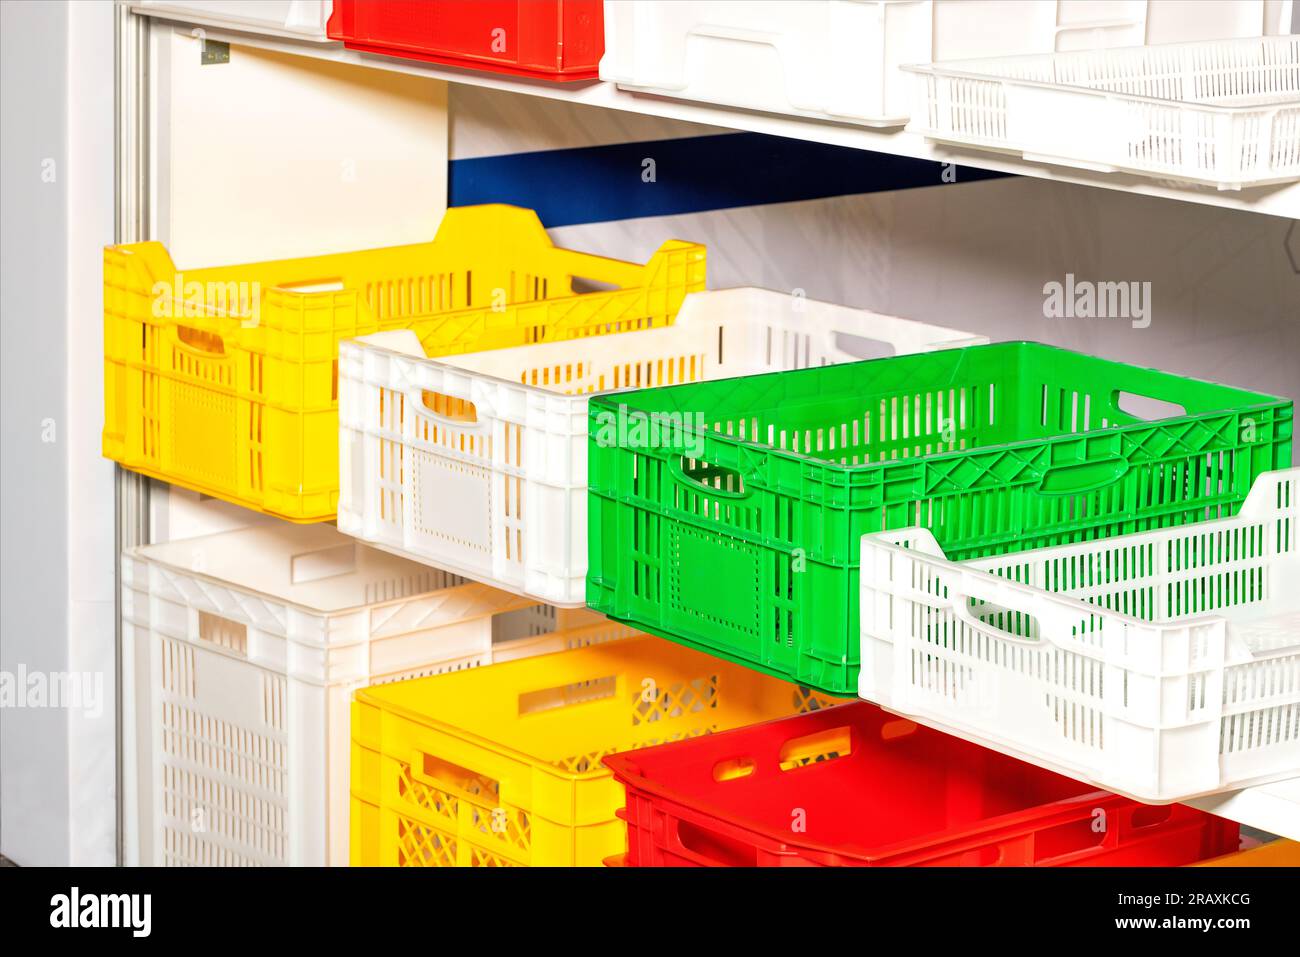 Plastic colored boxes on racks for storing various products. Stock Photo